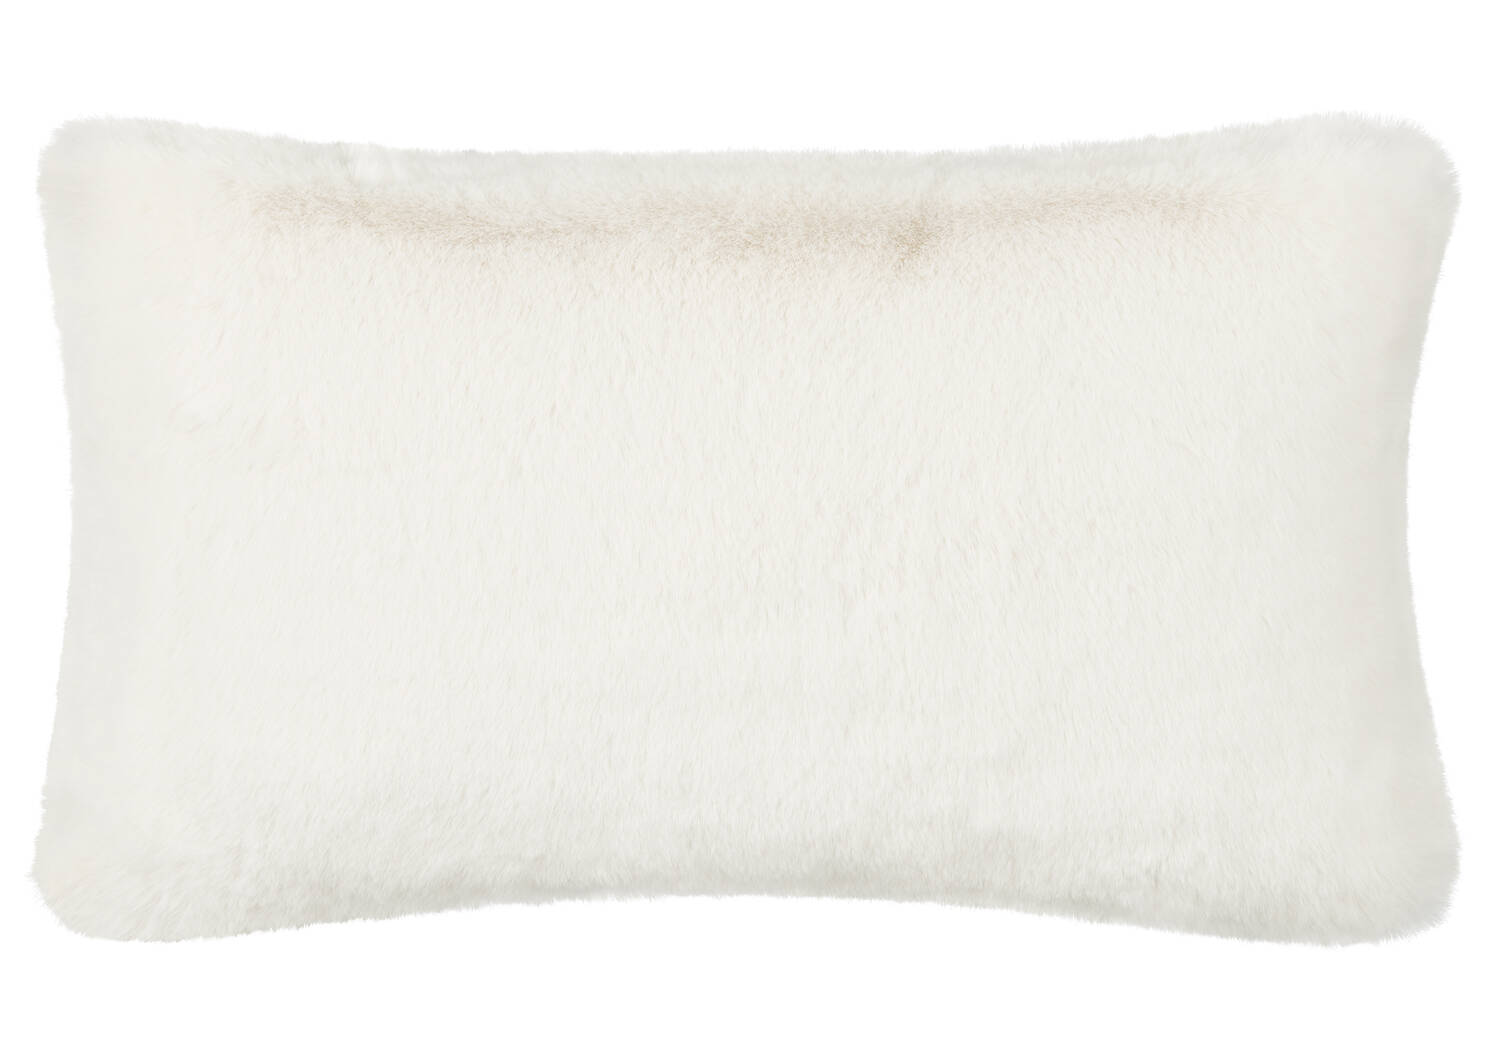 Cate Faux Fur Pillow 14x24 Ivory